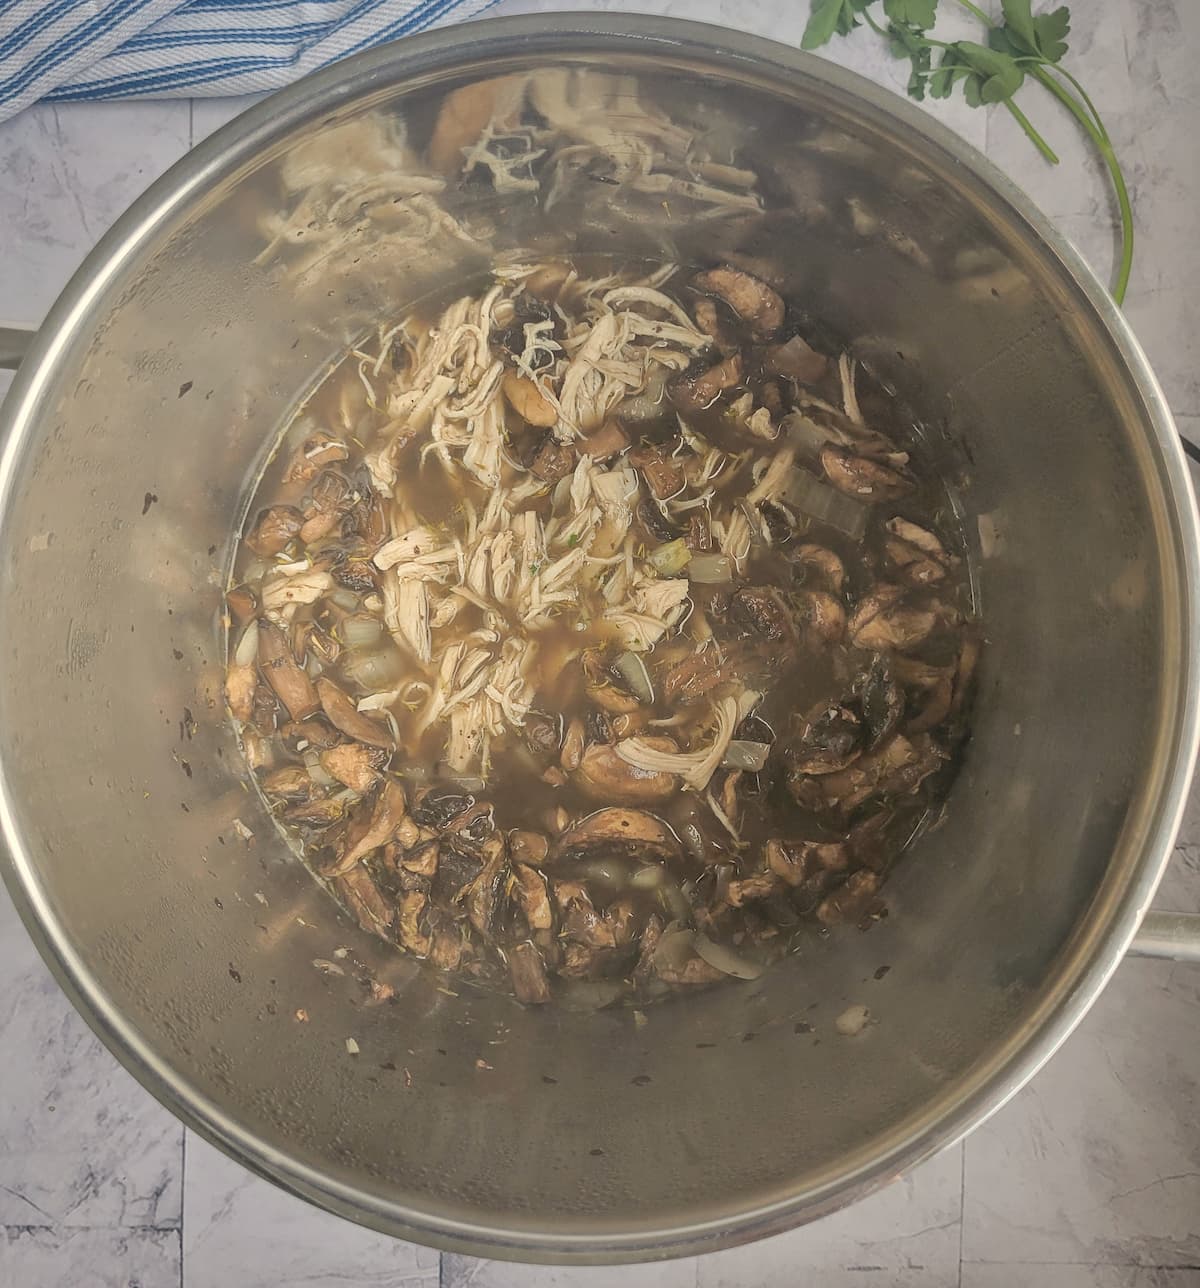 mushrooms, shredded chicken, broth and spices in a large pot